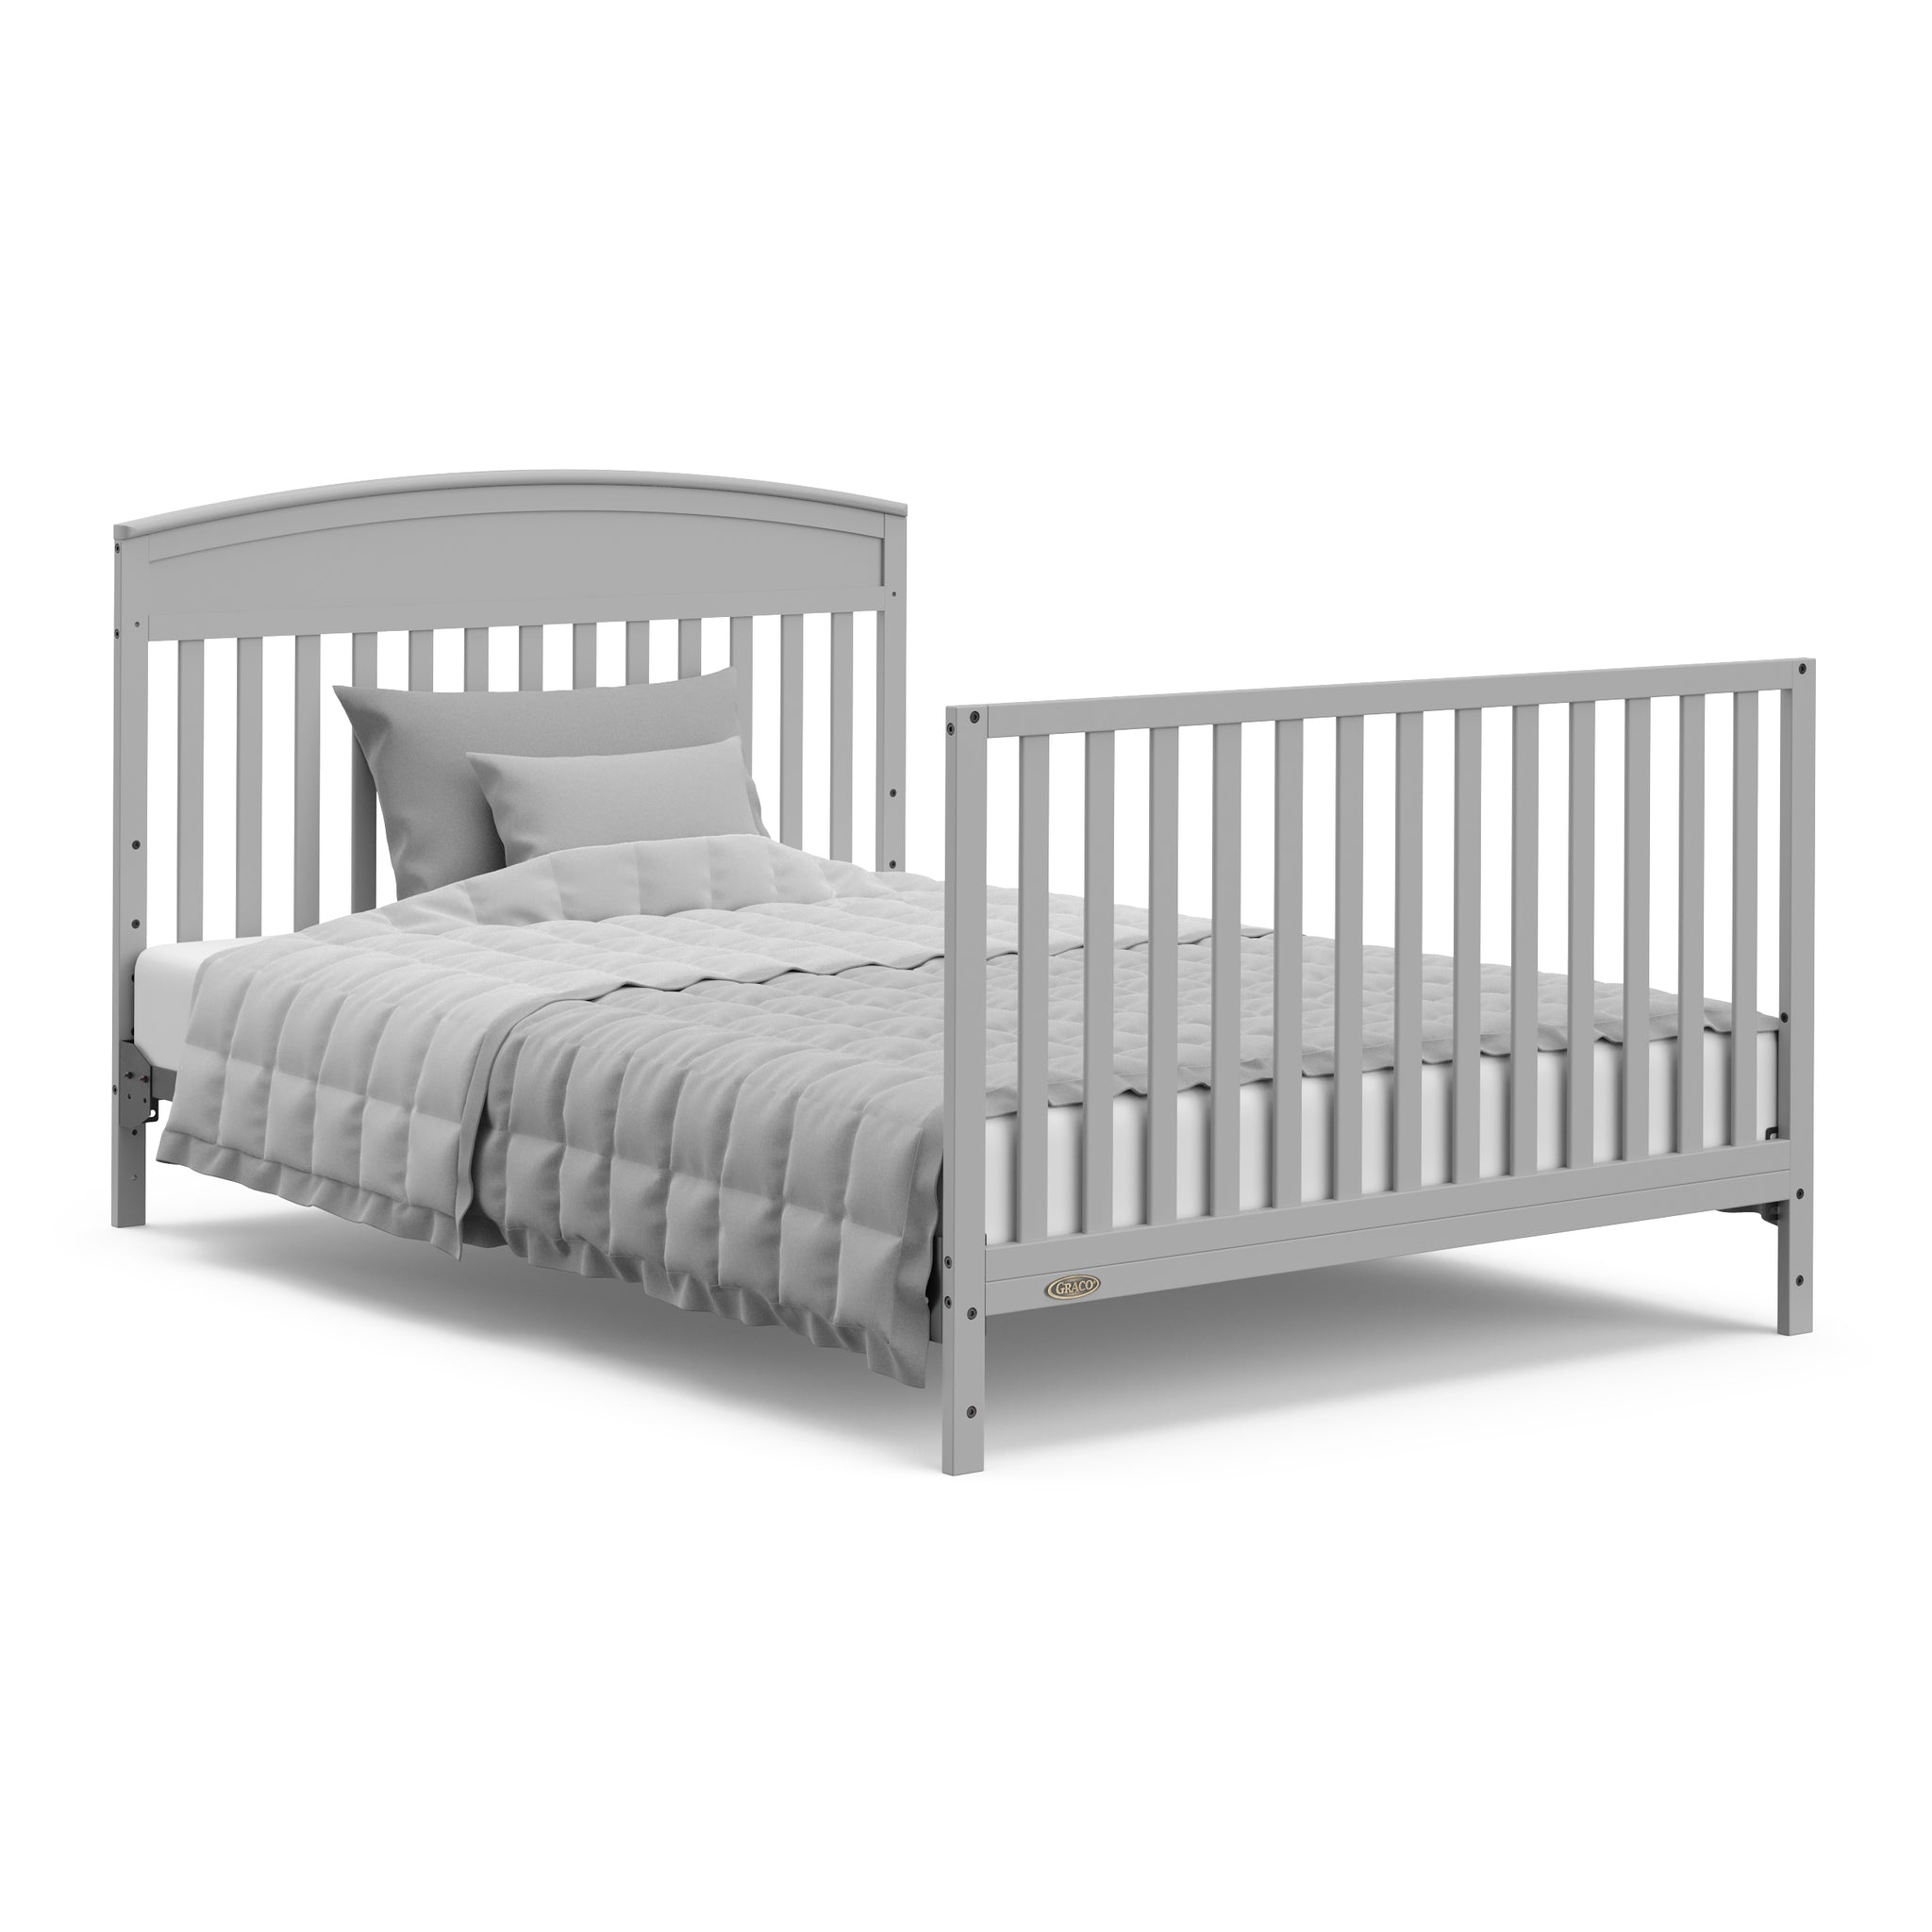 Pebble gray crib with drawer in full-size bed with headboard and footboard conversion